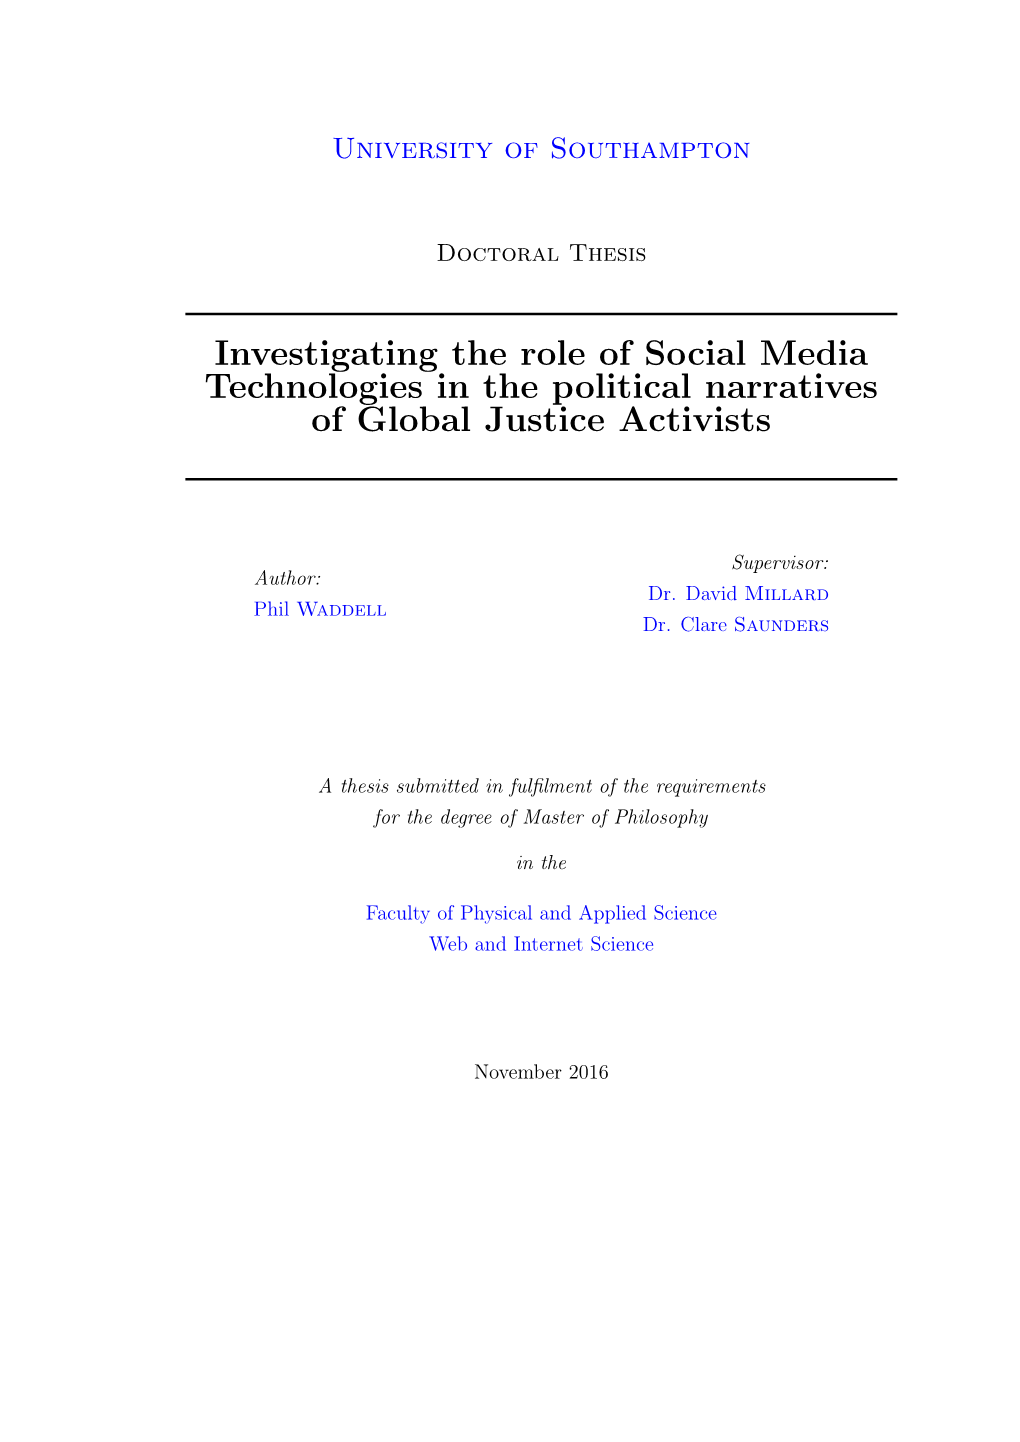 Investigating the Role of Social Media Technologies in the Political Narratives of Global Justice Activists